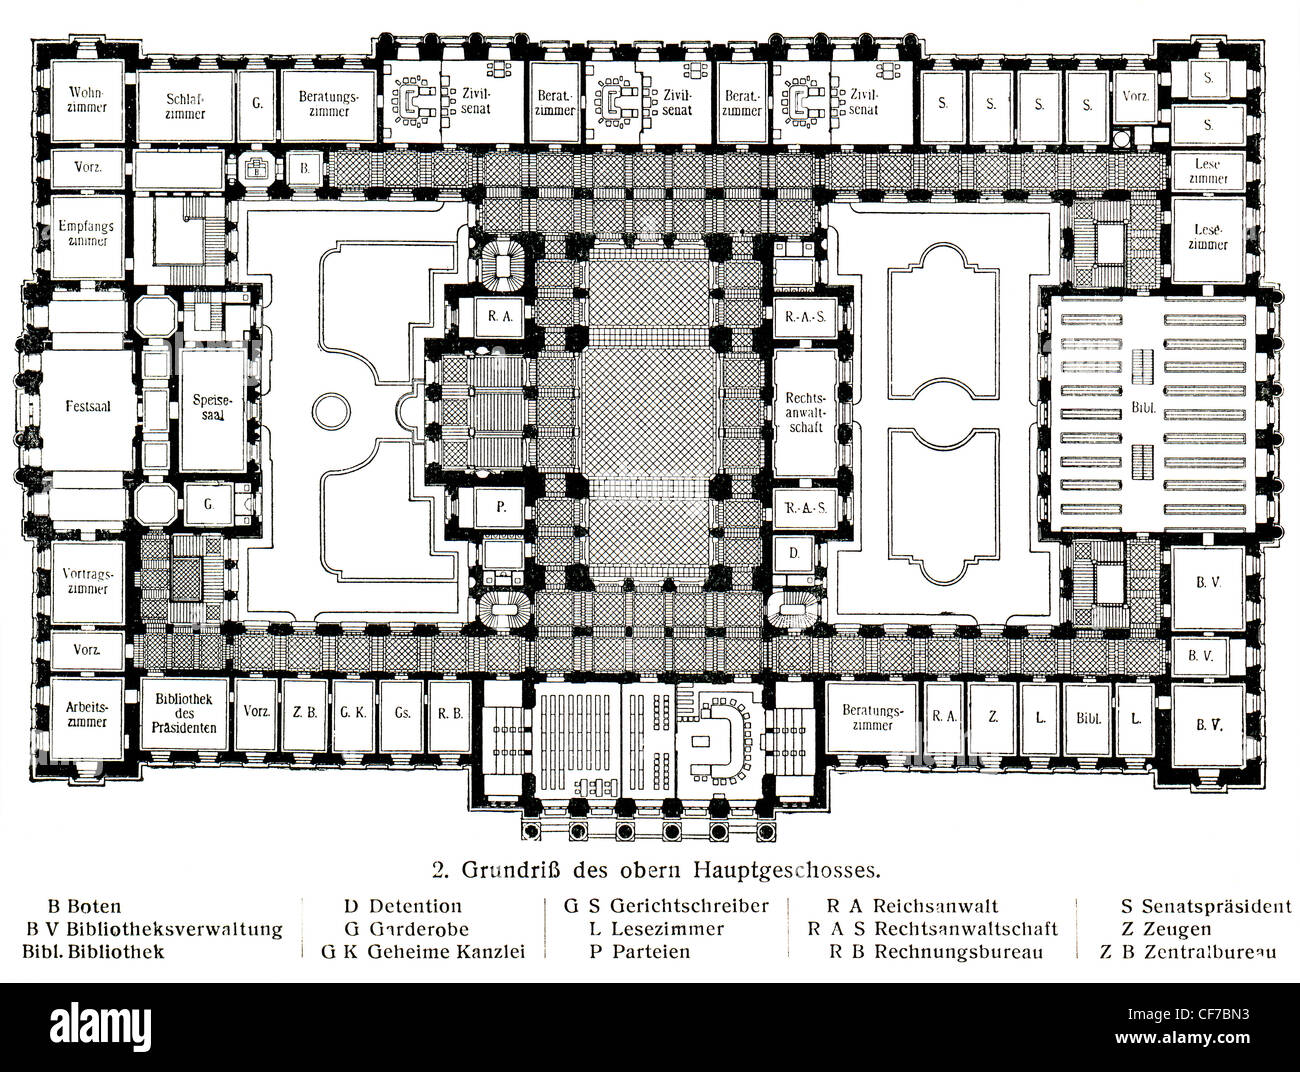 A schematic layout of the building of the Supreme Court in